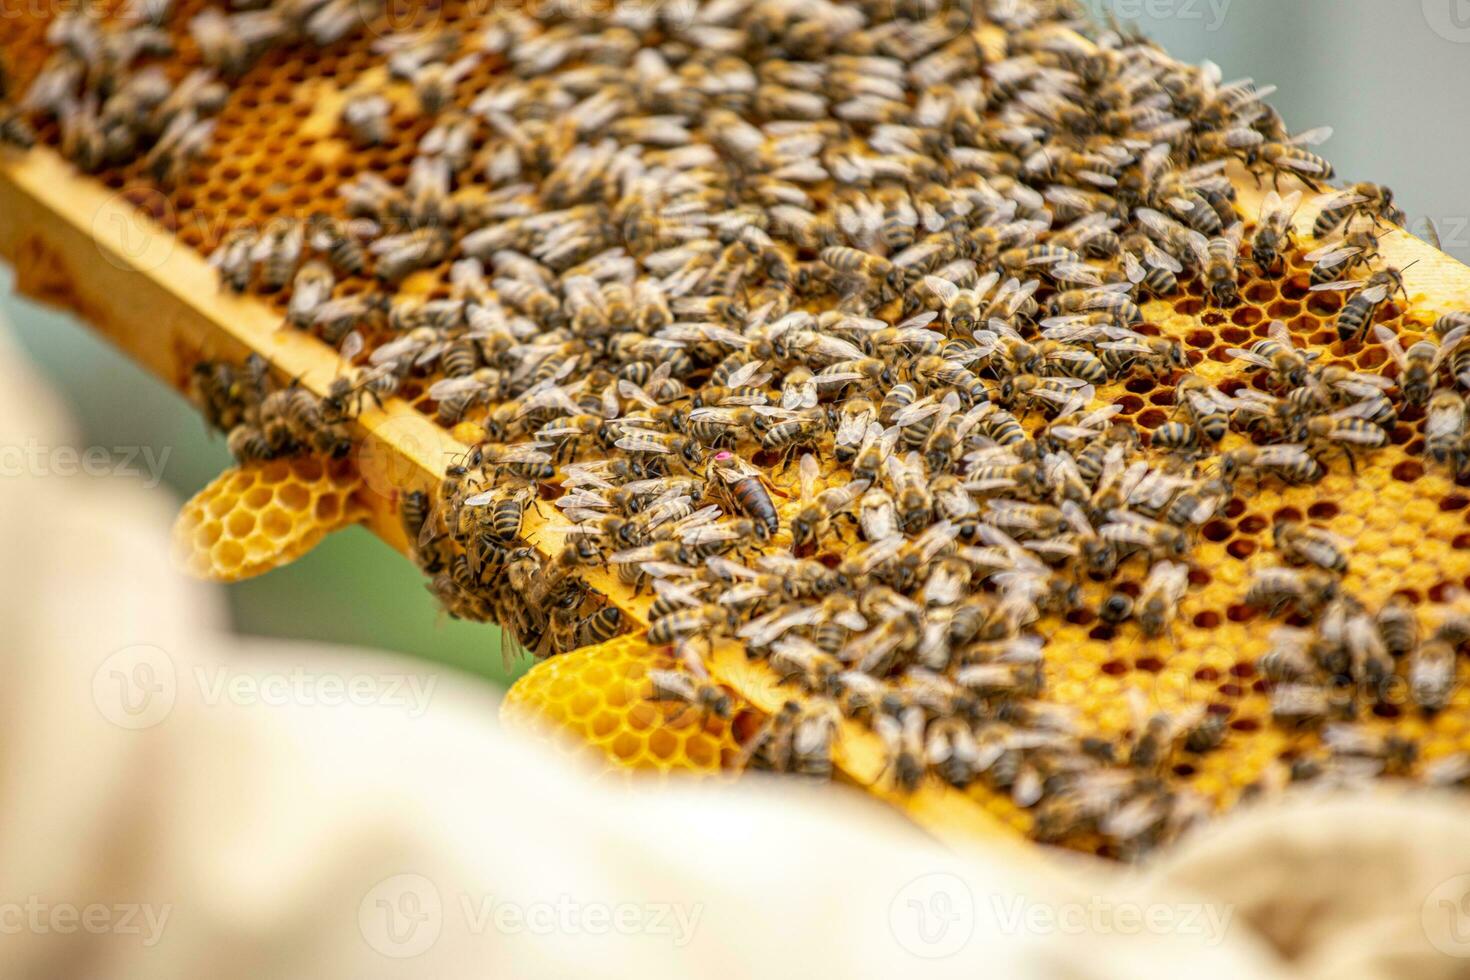 Tagged queen bee crawls on frame filled with bees and brood. strong family on frame. photo